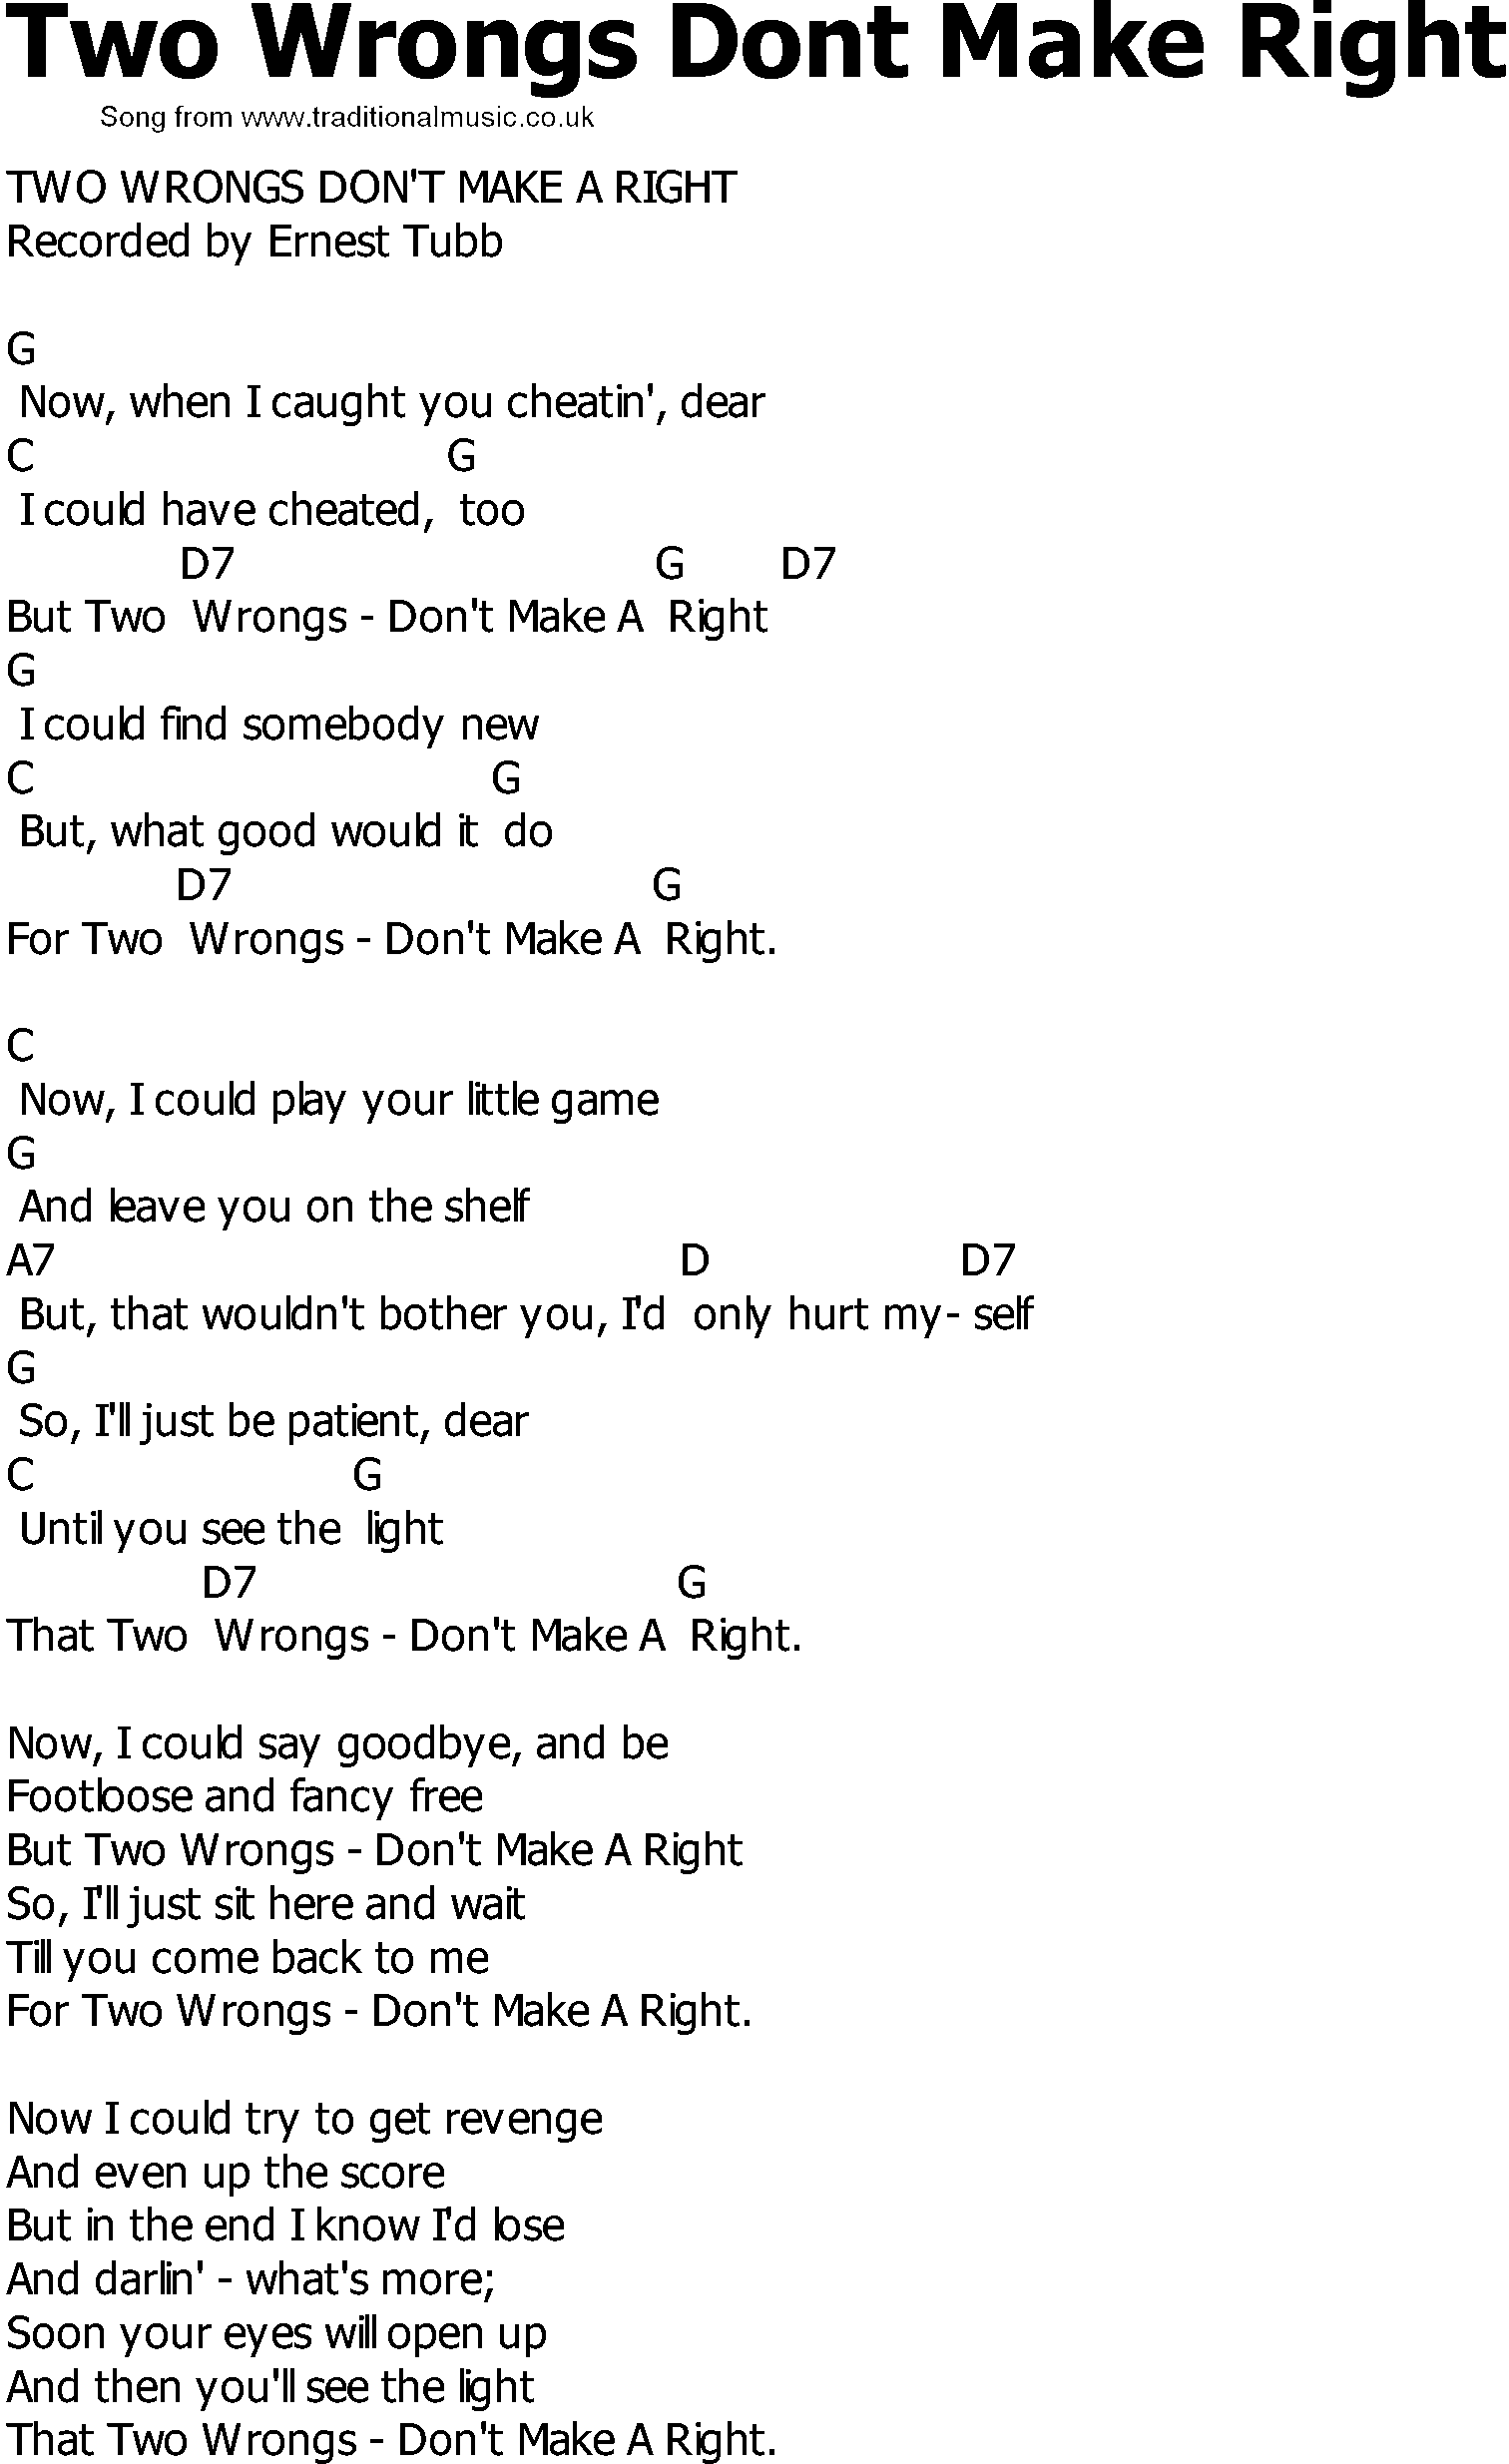 Old Country song lyrics with chords - Two Wrongs Dont Make Right